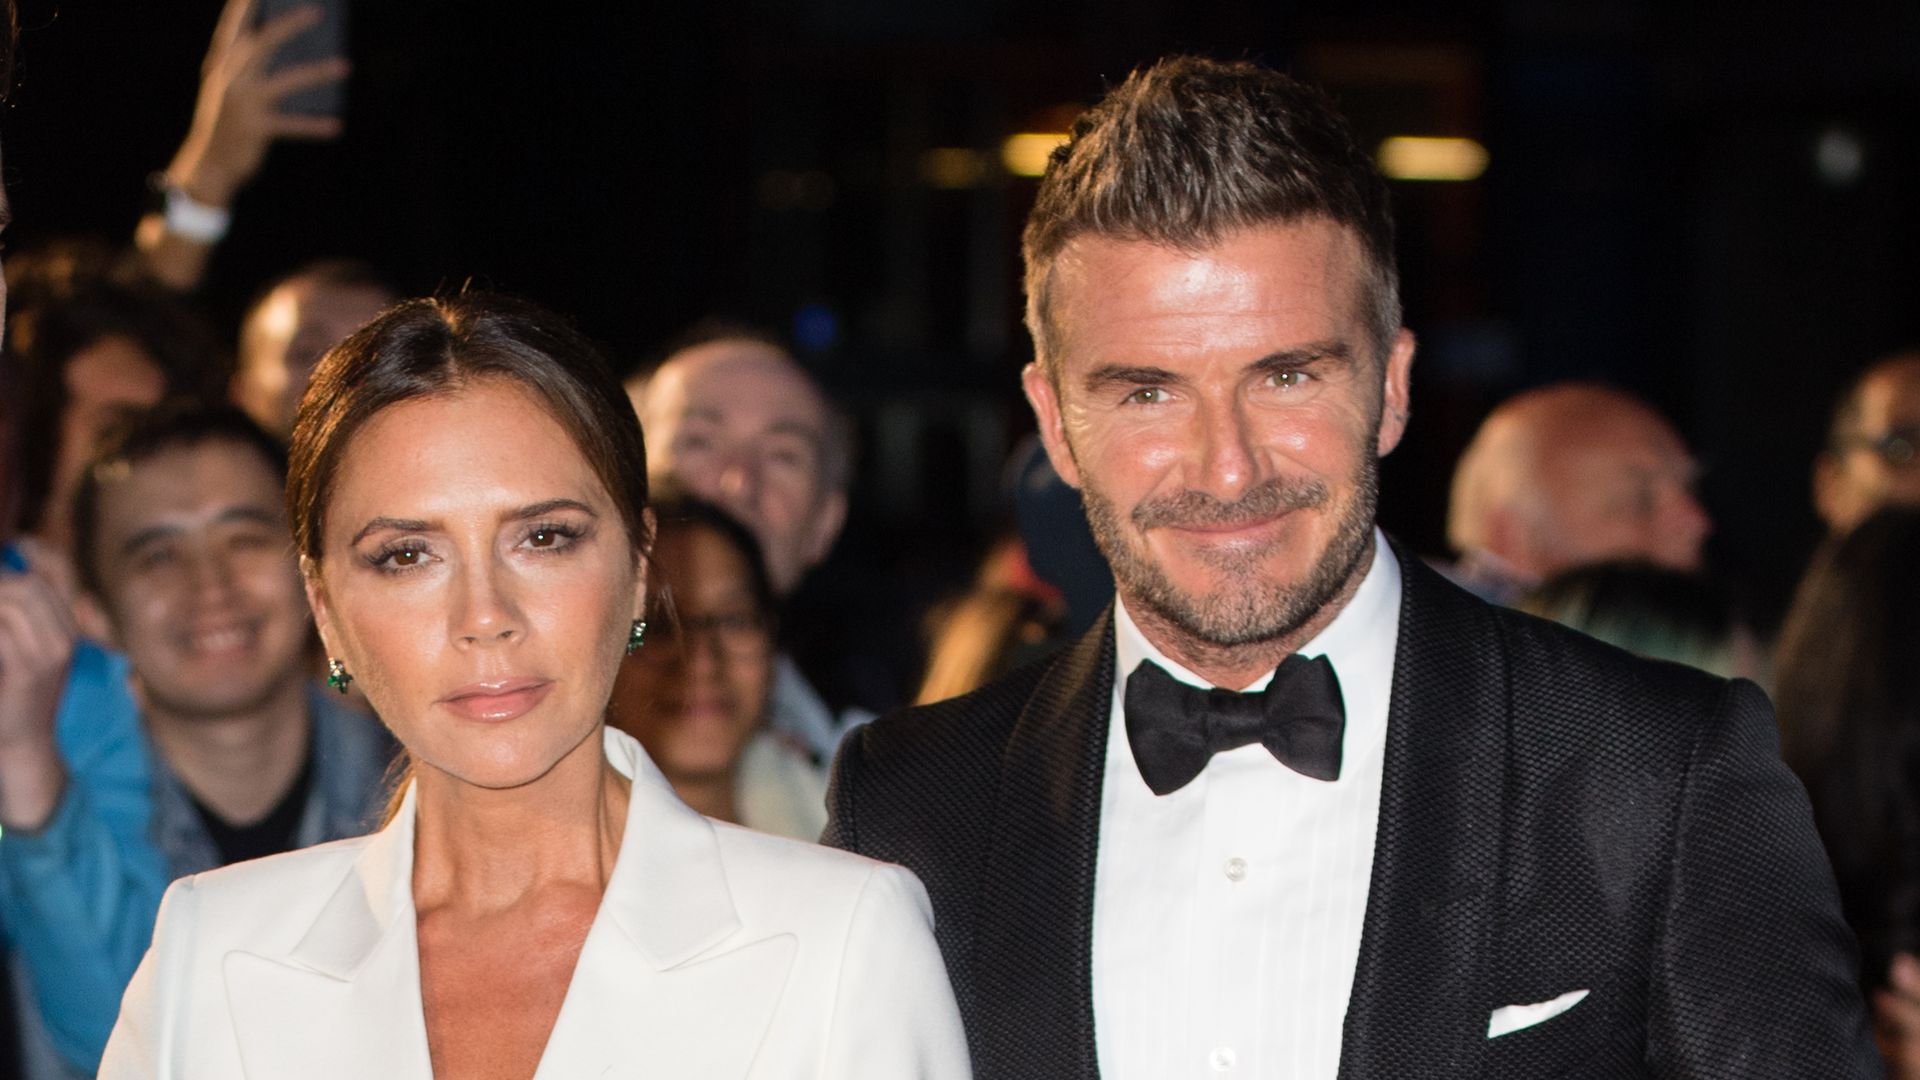 Victoria Beckham in white outfit stood with David Beckham in a suit